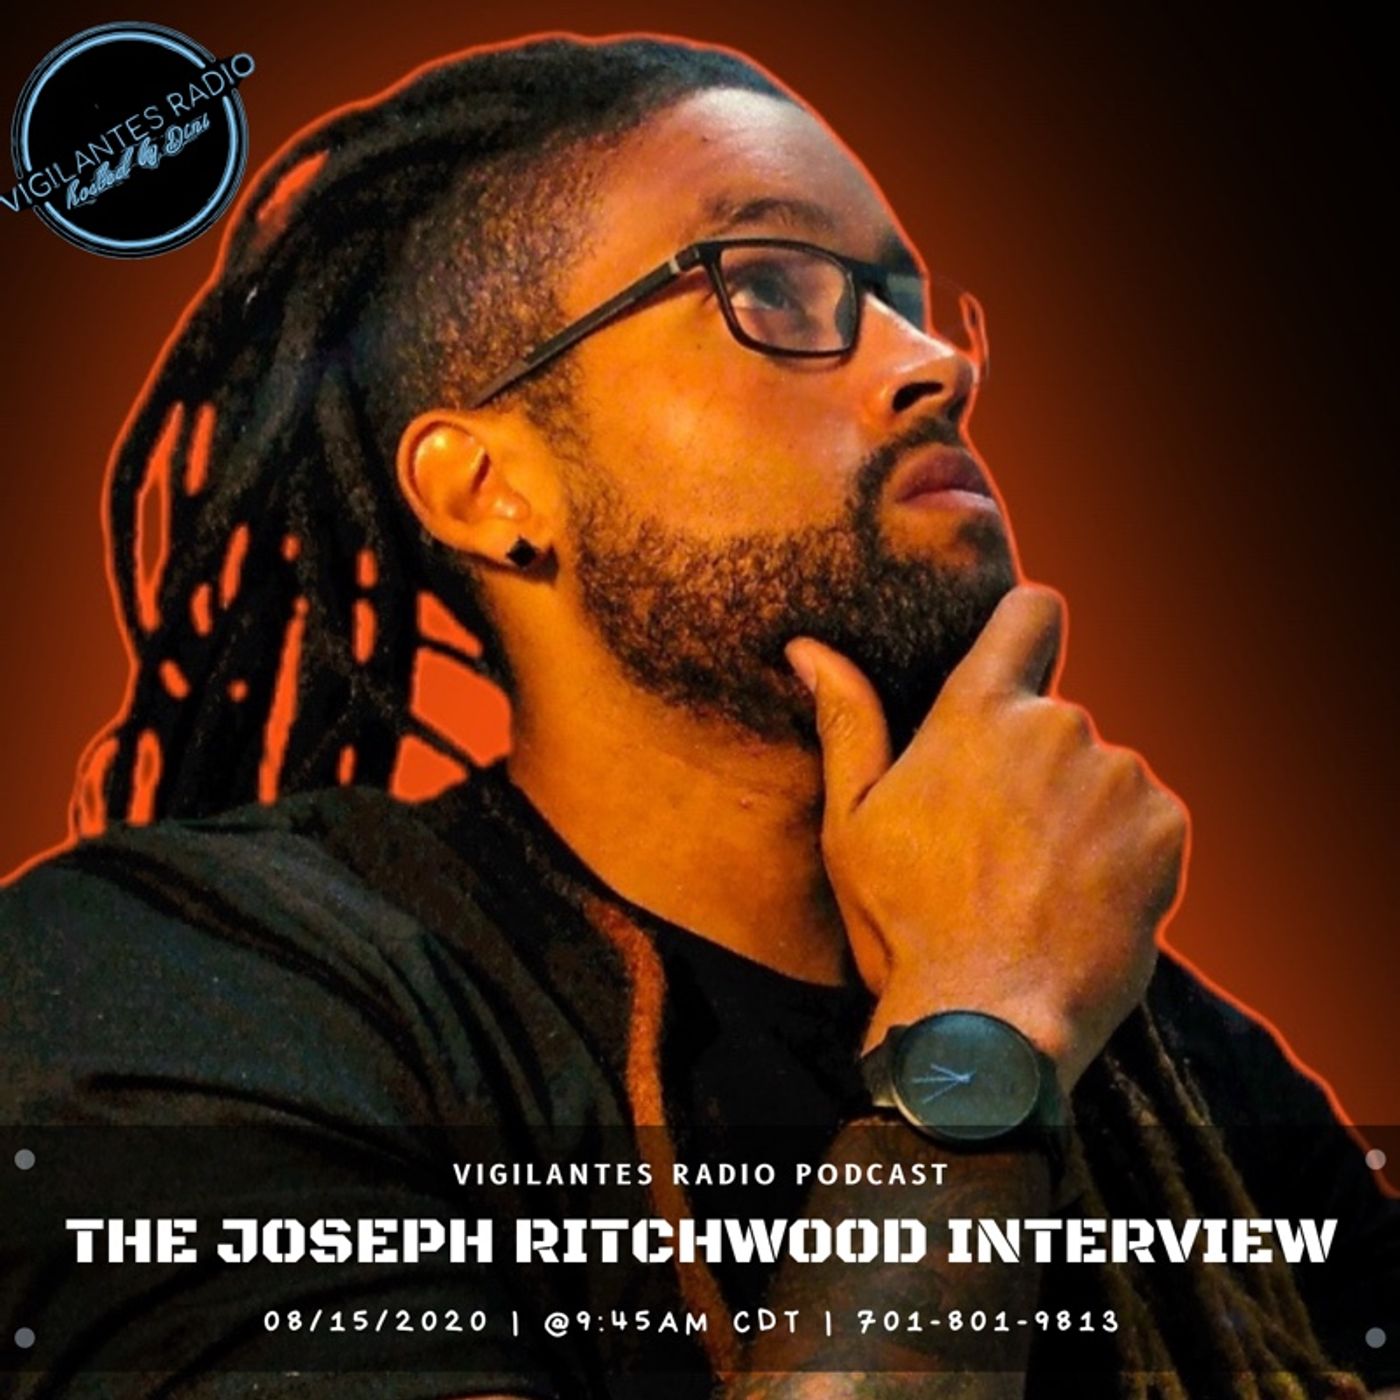 The Joseph Ritchwood Interview. Image